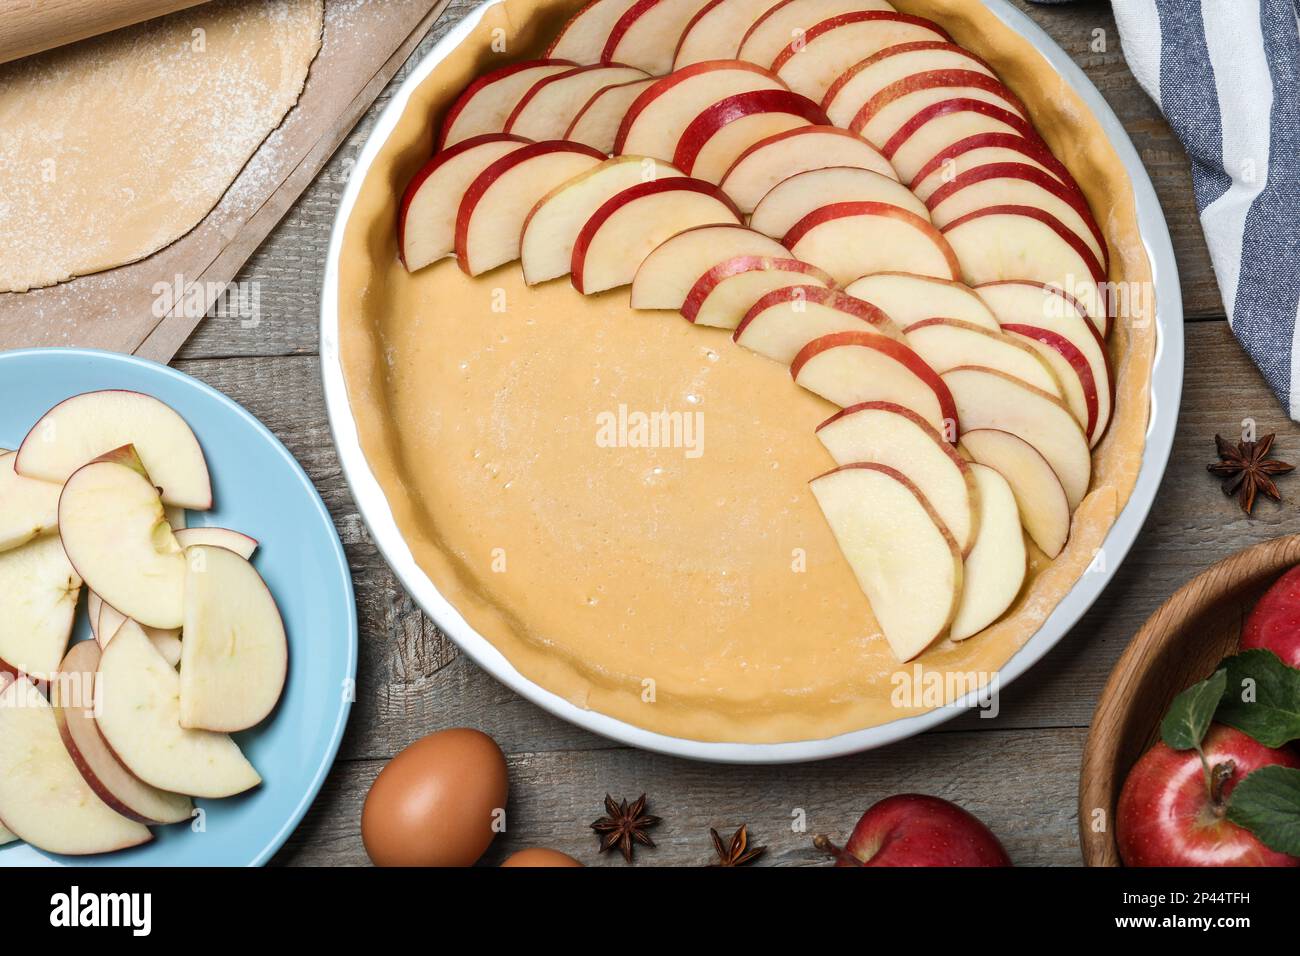 Dish with fresh apple slices and raw dough on wooden table, flat lay. Baking pie Stock Photo